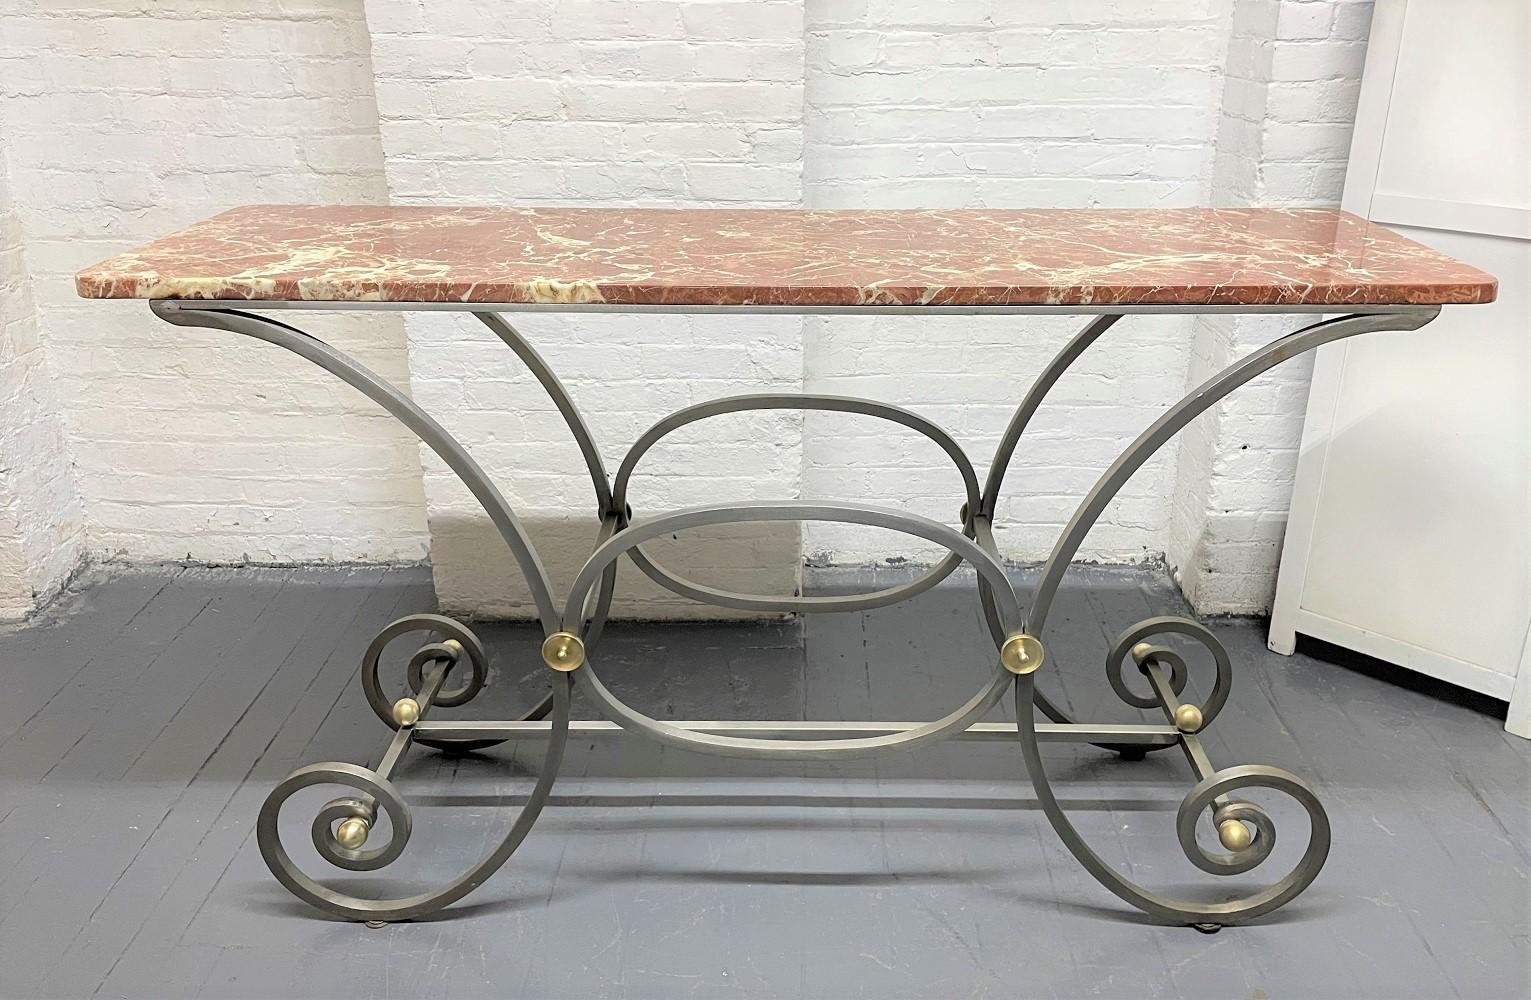 French, iron and marble-top console. Base has a nice, scrolled pattern with bronze round accents. Can also be used as a baker's table.